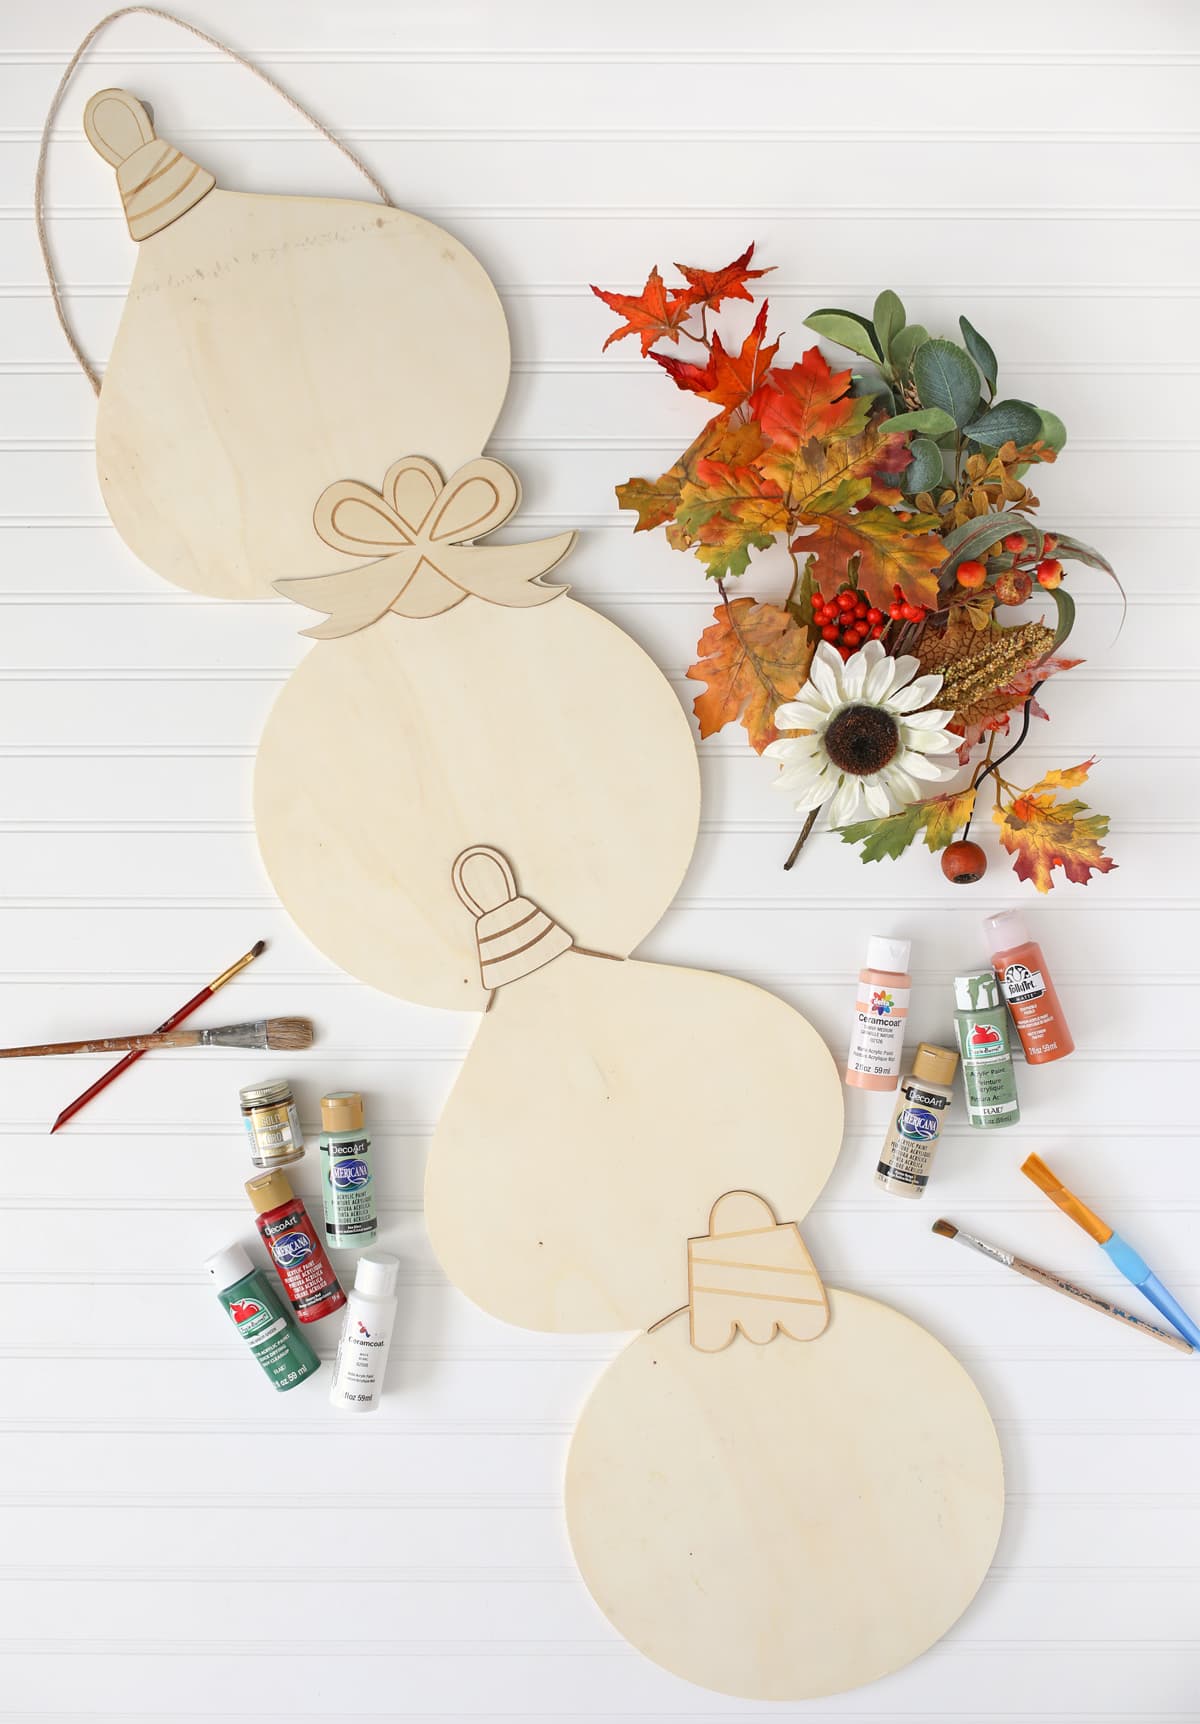 materials needed to make a reversible ornaments and pumpkins decoration